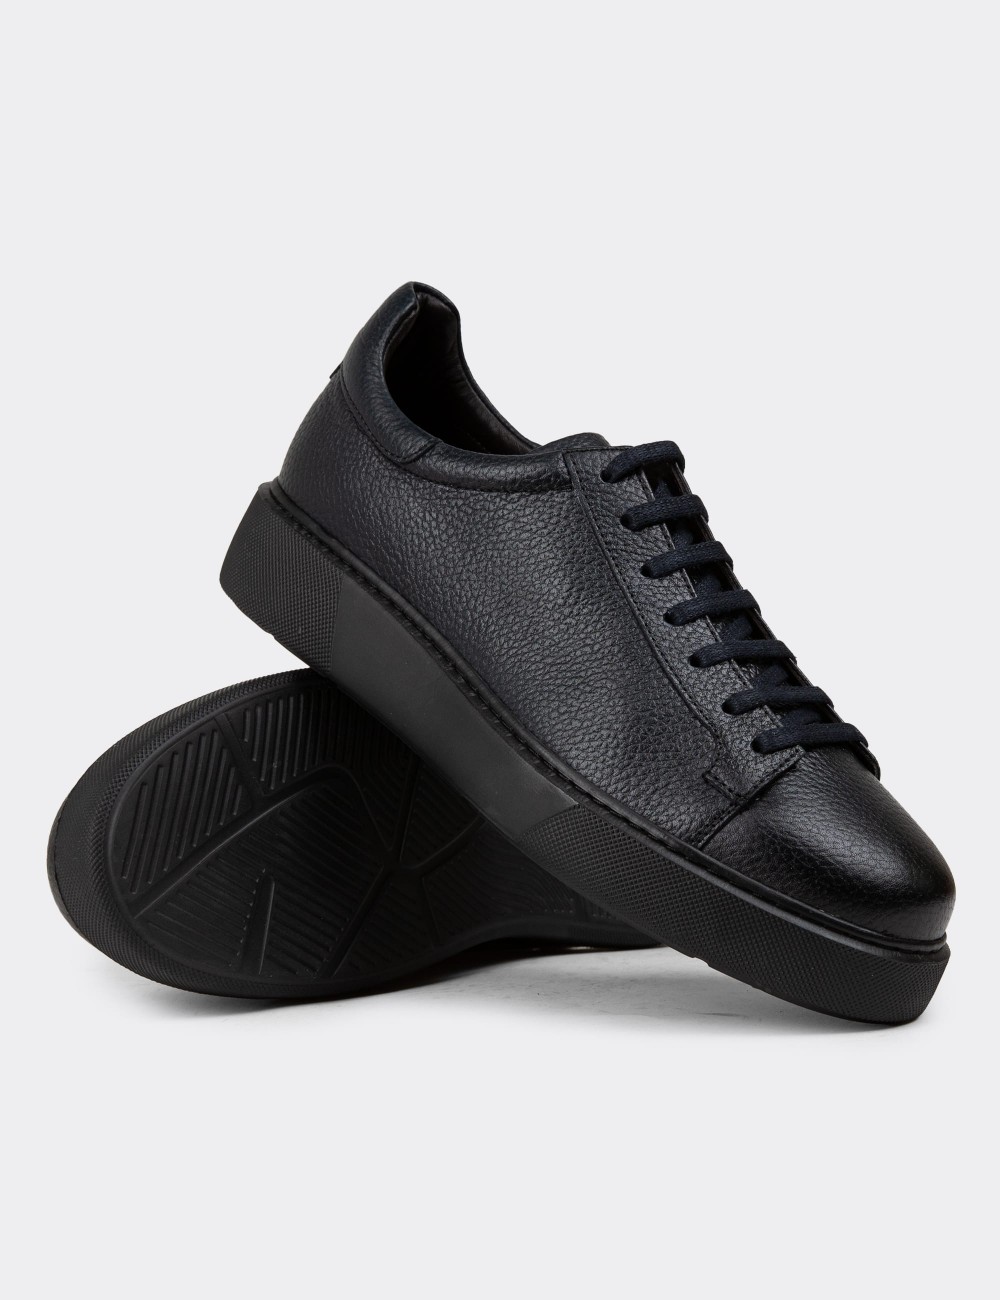 Navy Leather Sneakers - 01954MLCVE03